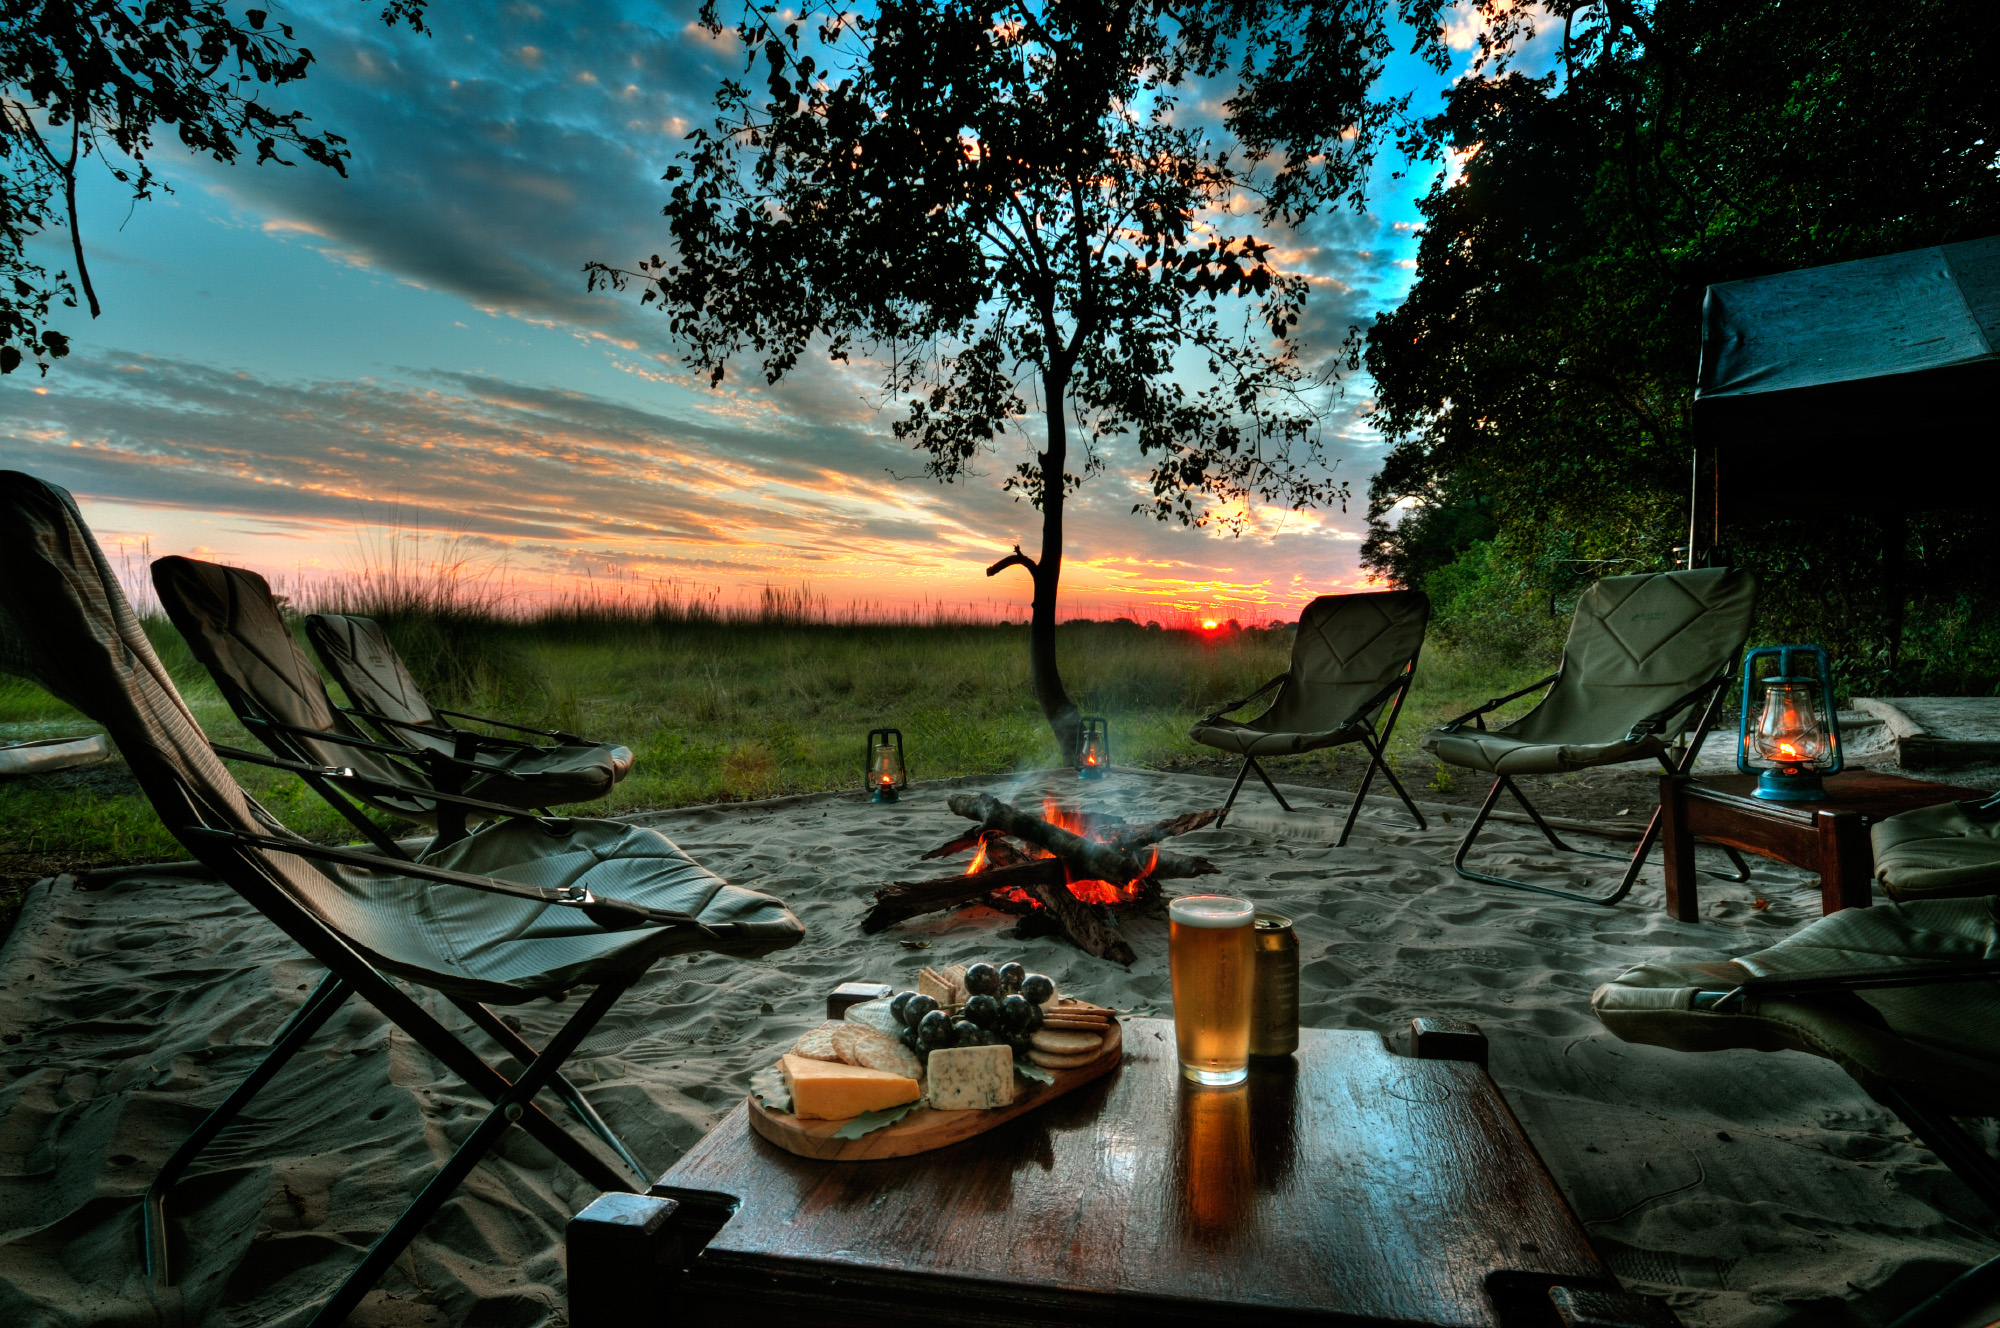 camping, beer, photography, bonfire, chair, food, lantern, sunset, tree